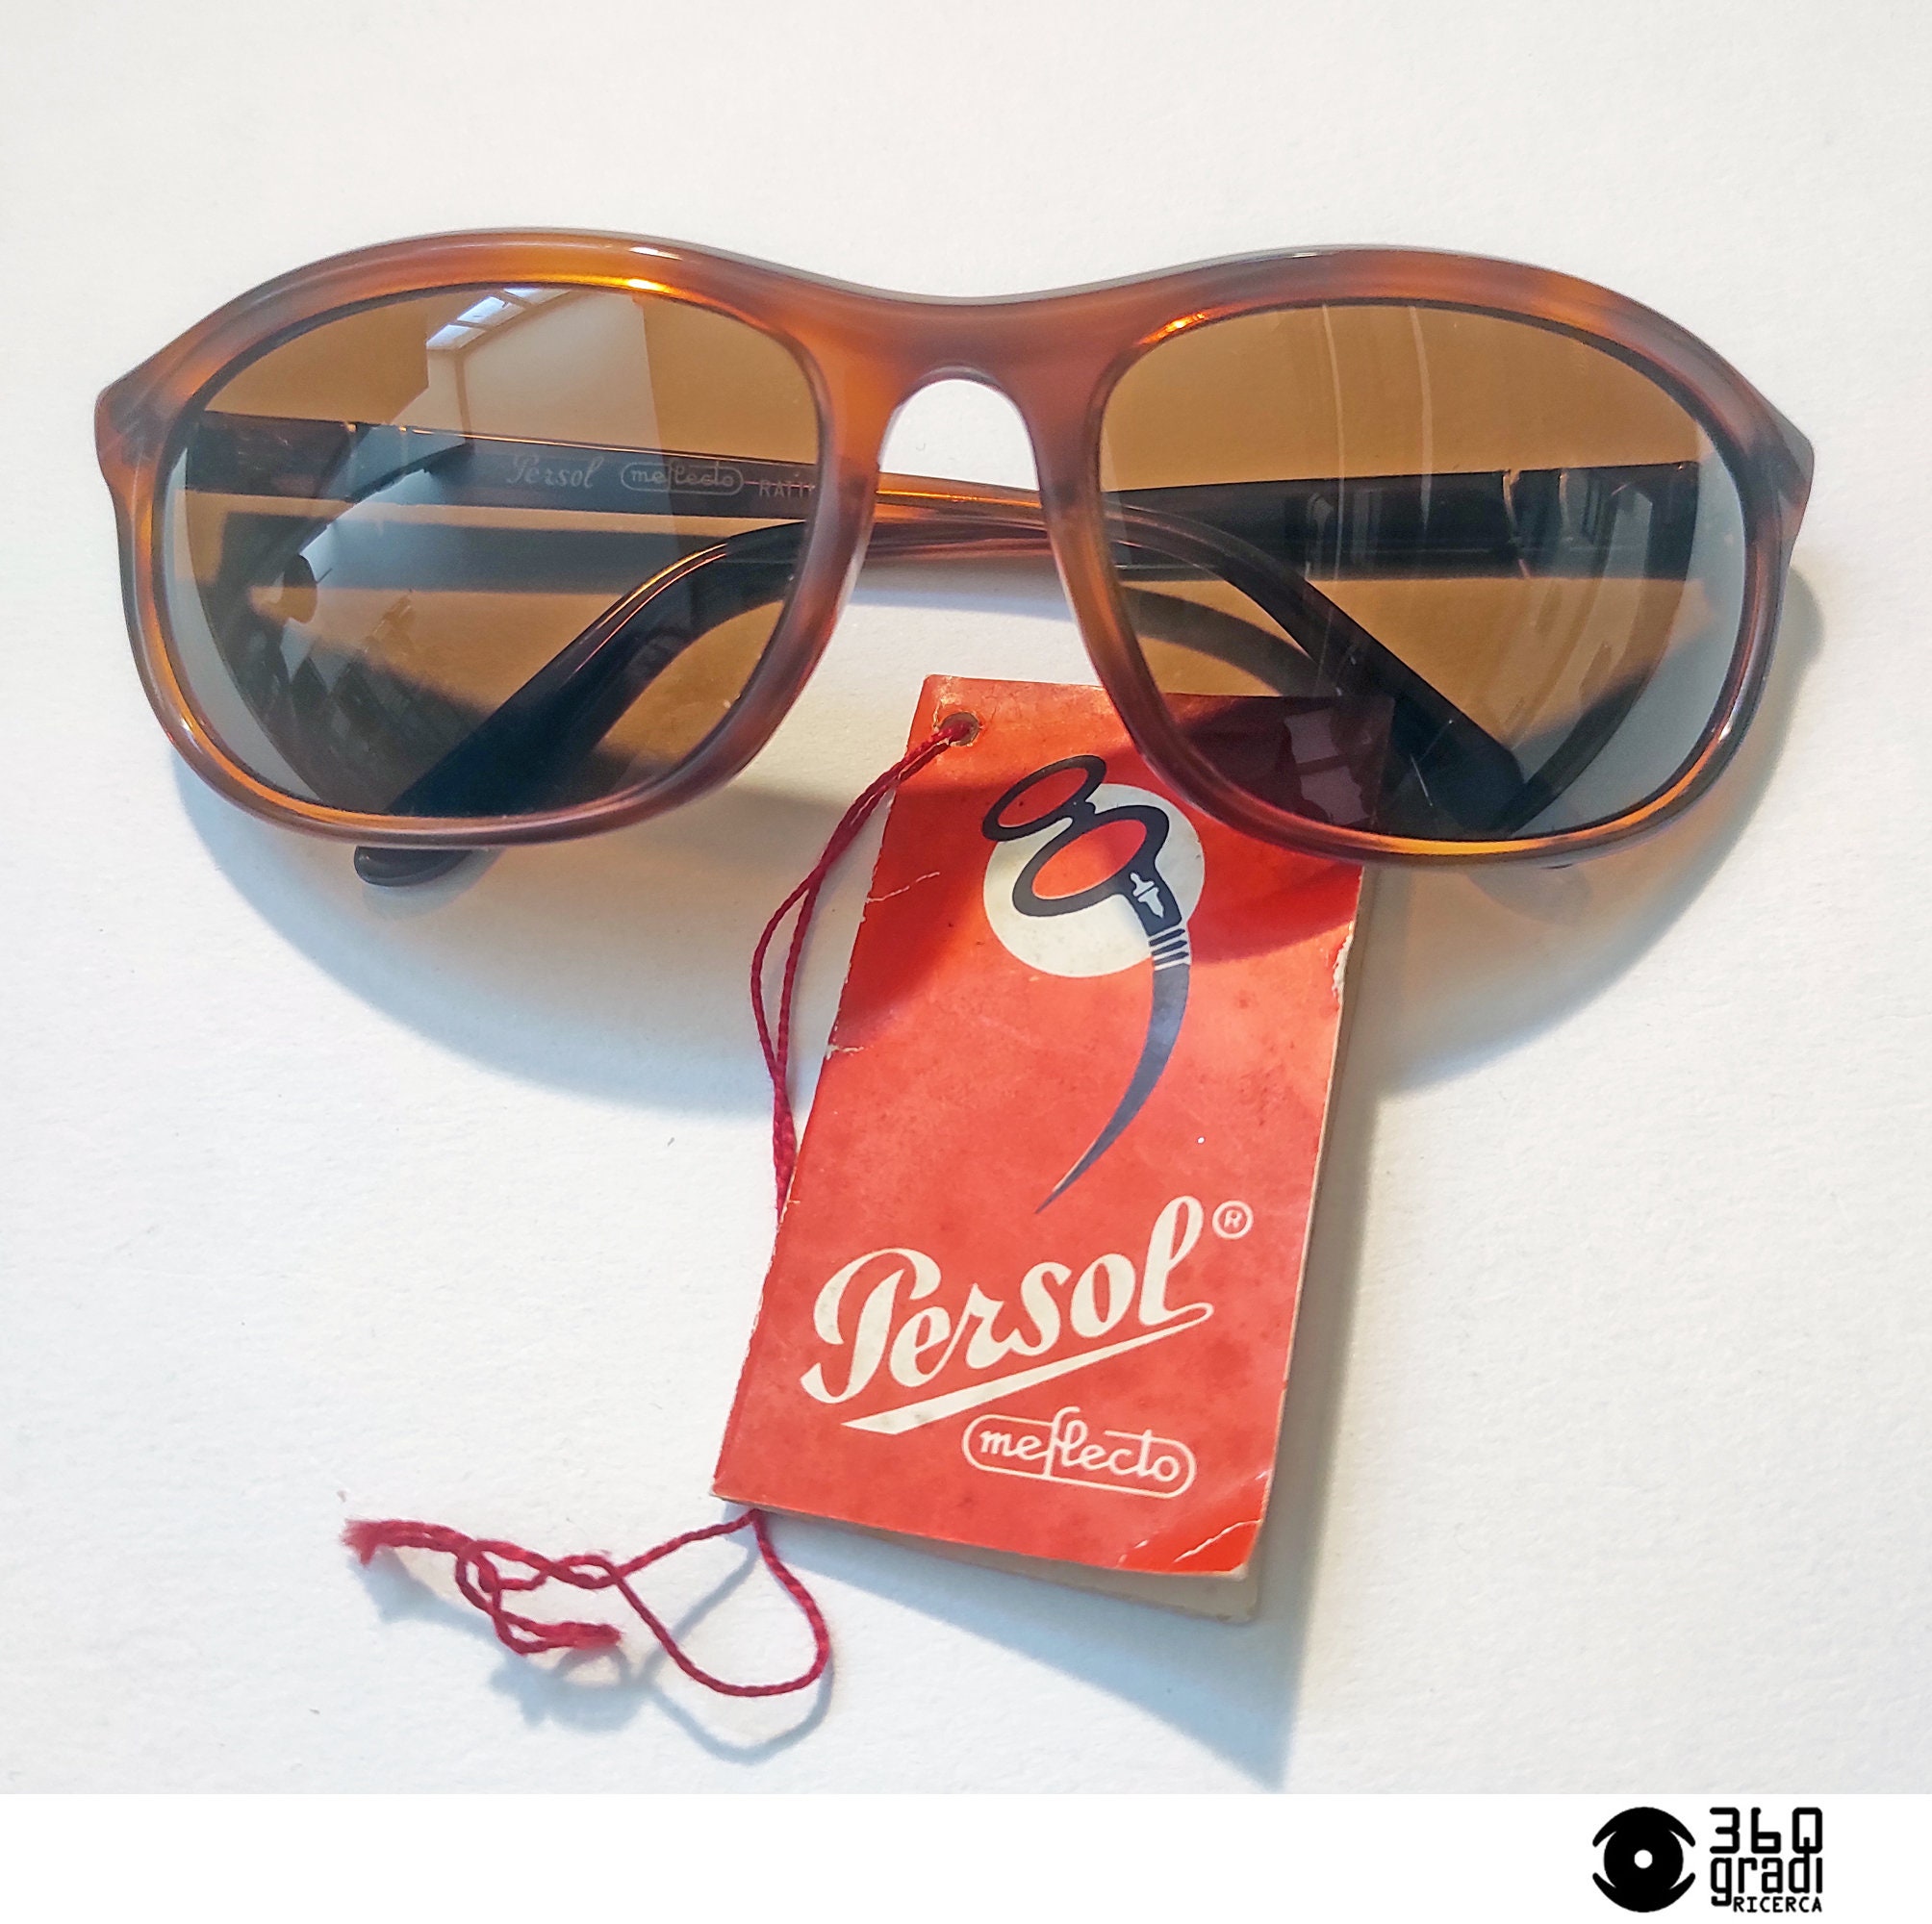 Christmas Present A Pair of Persol Sunglasses from EyeWearThese